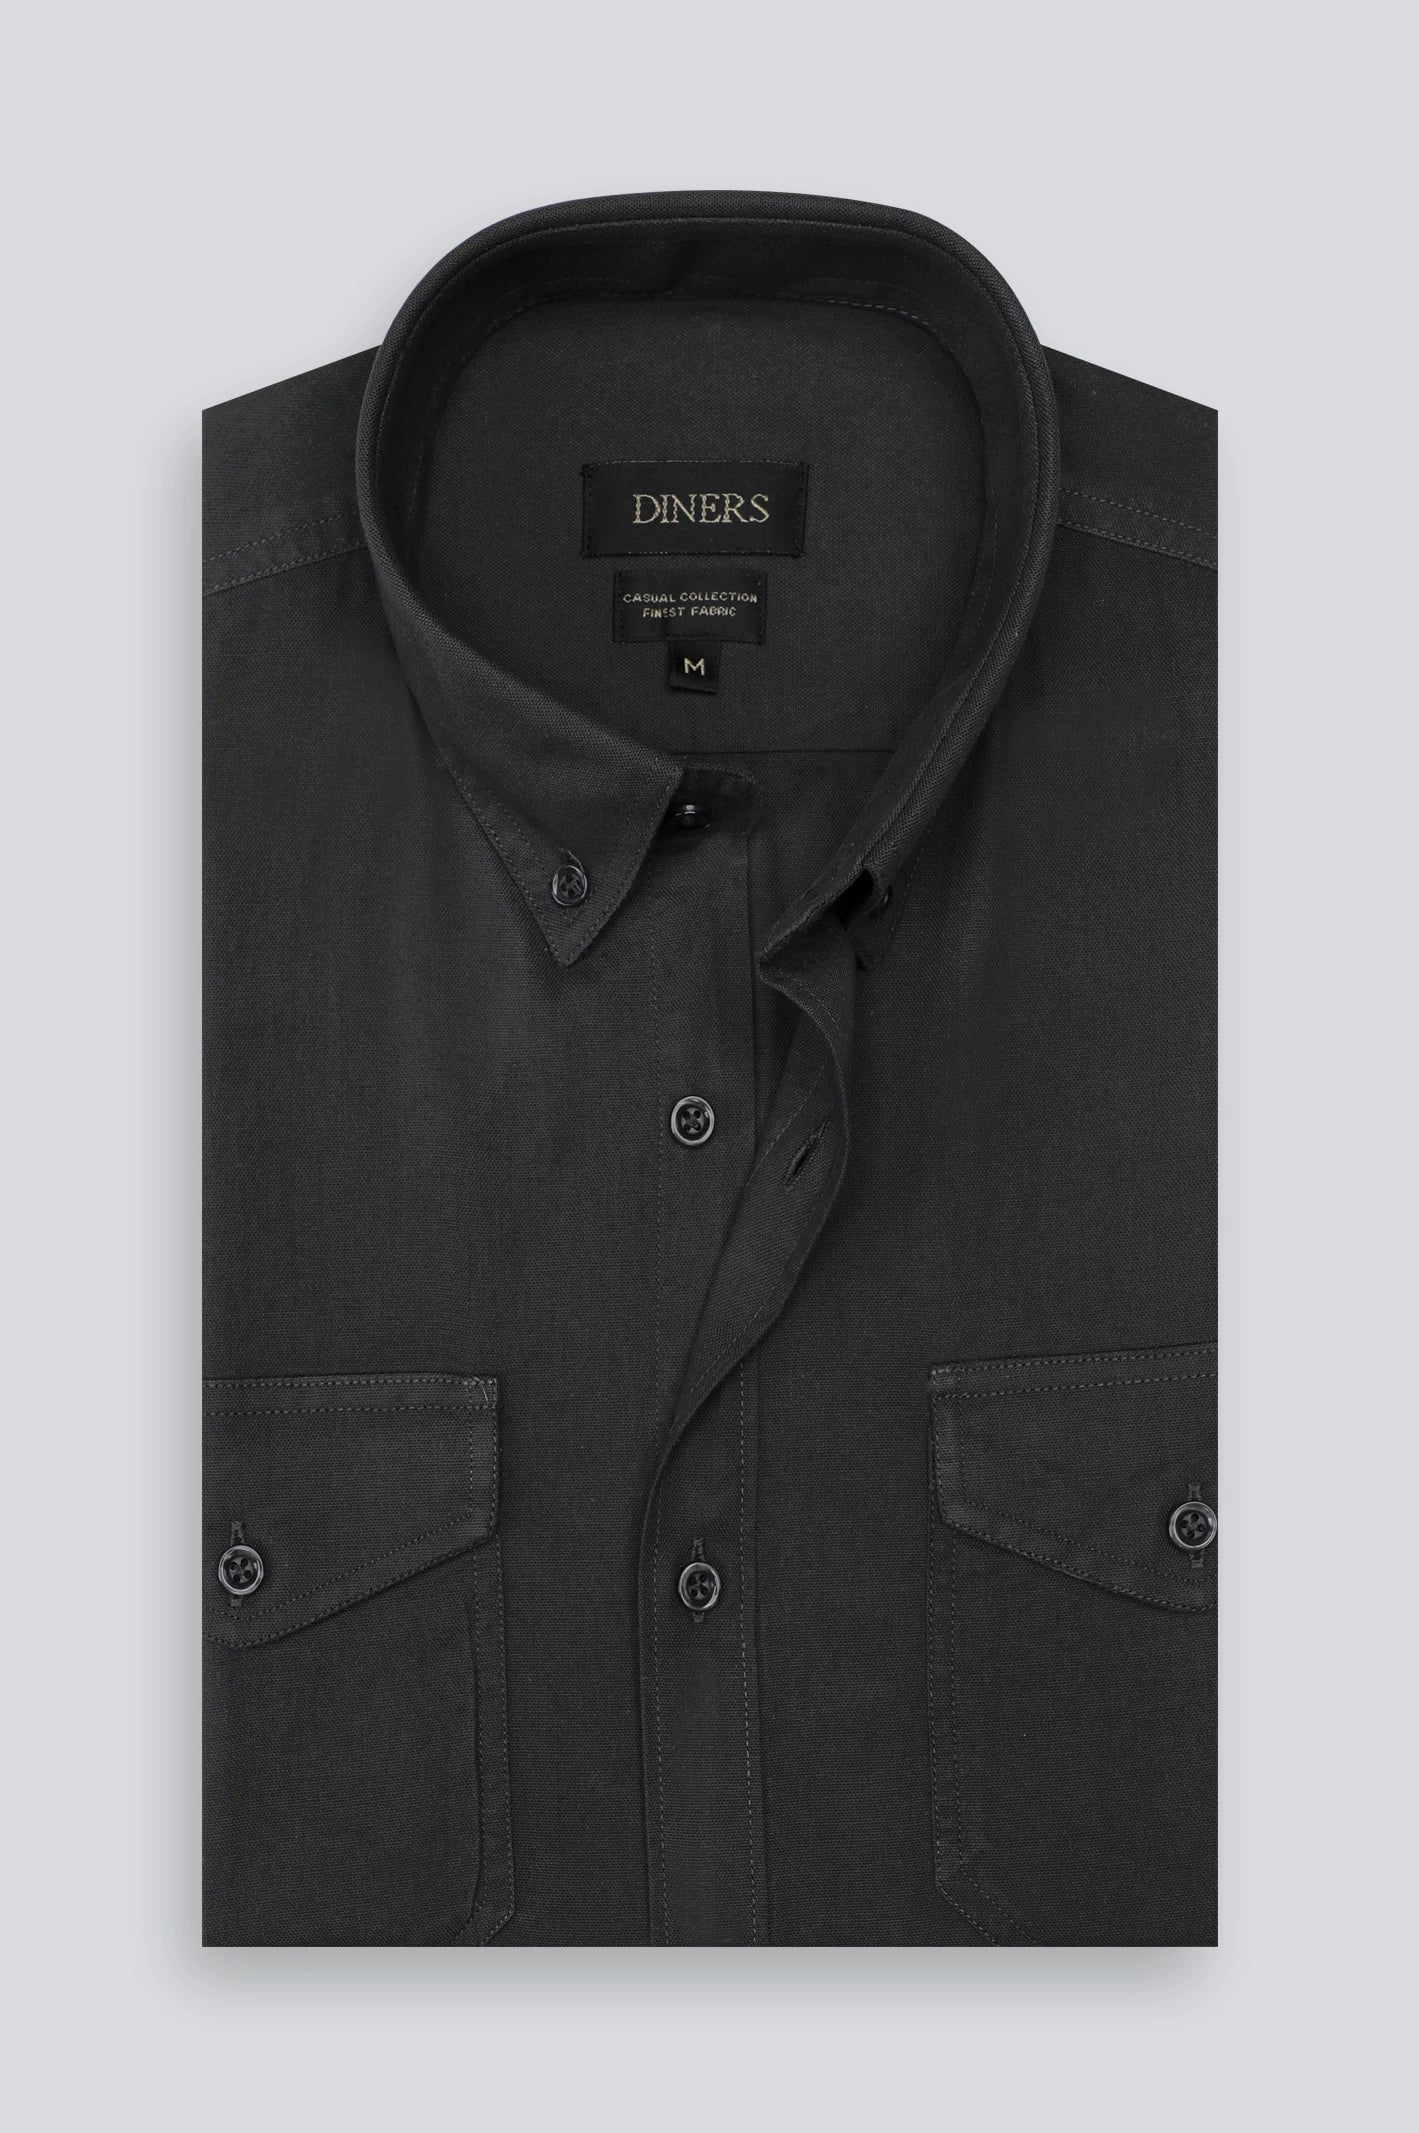 Black Plain Casual Shirt For Men From Diners